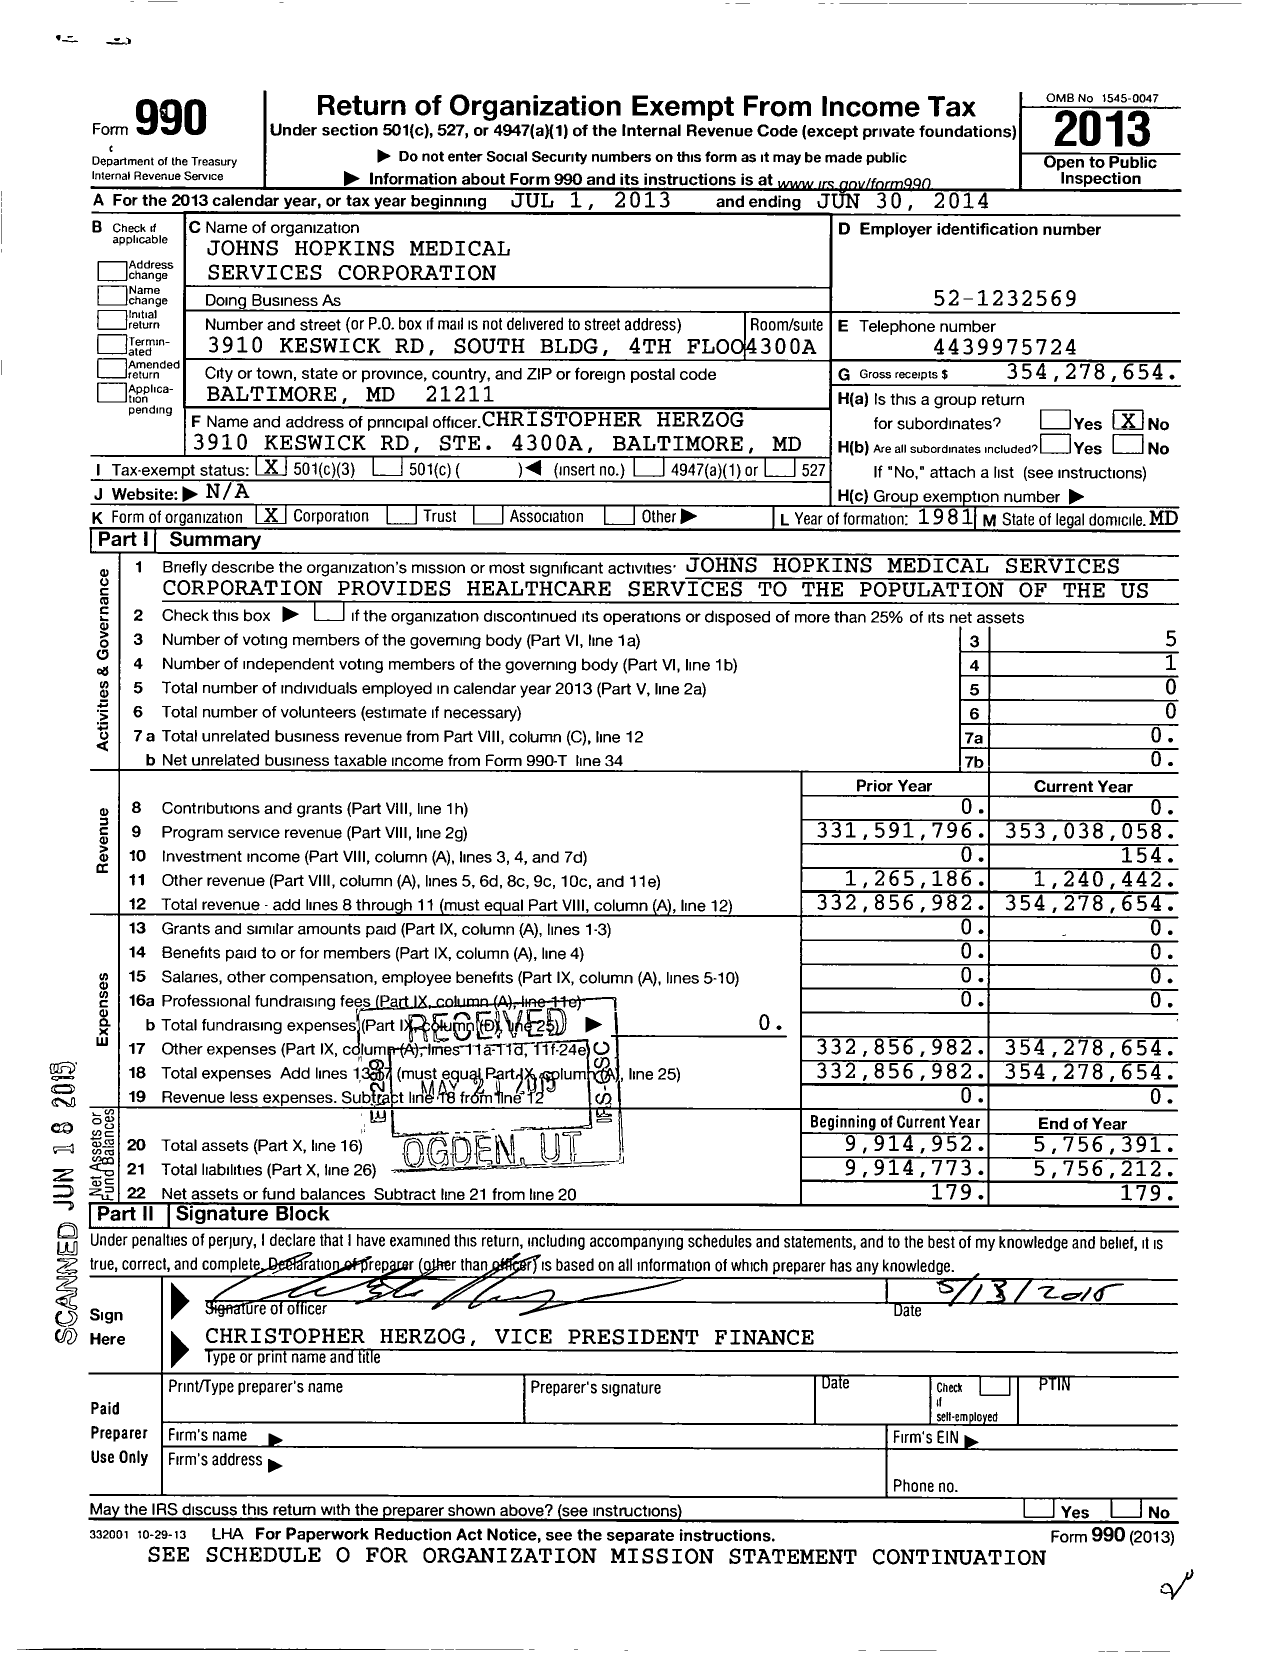 Image of first page of 2013 Form 990 for Johns Hopkins Medical Services Corporation